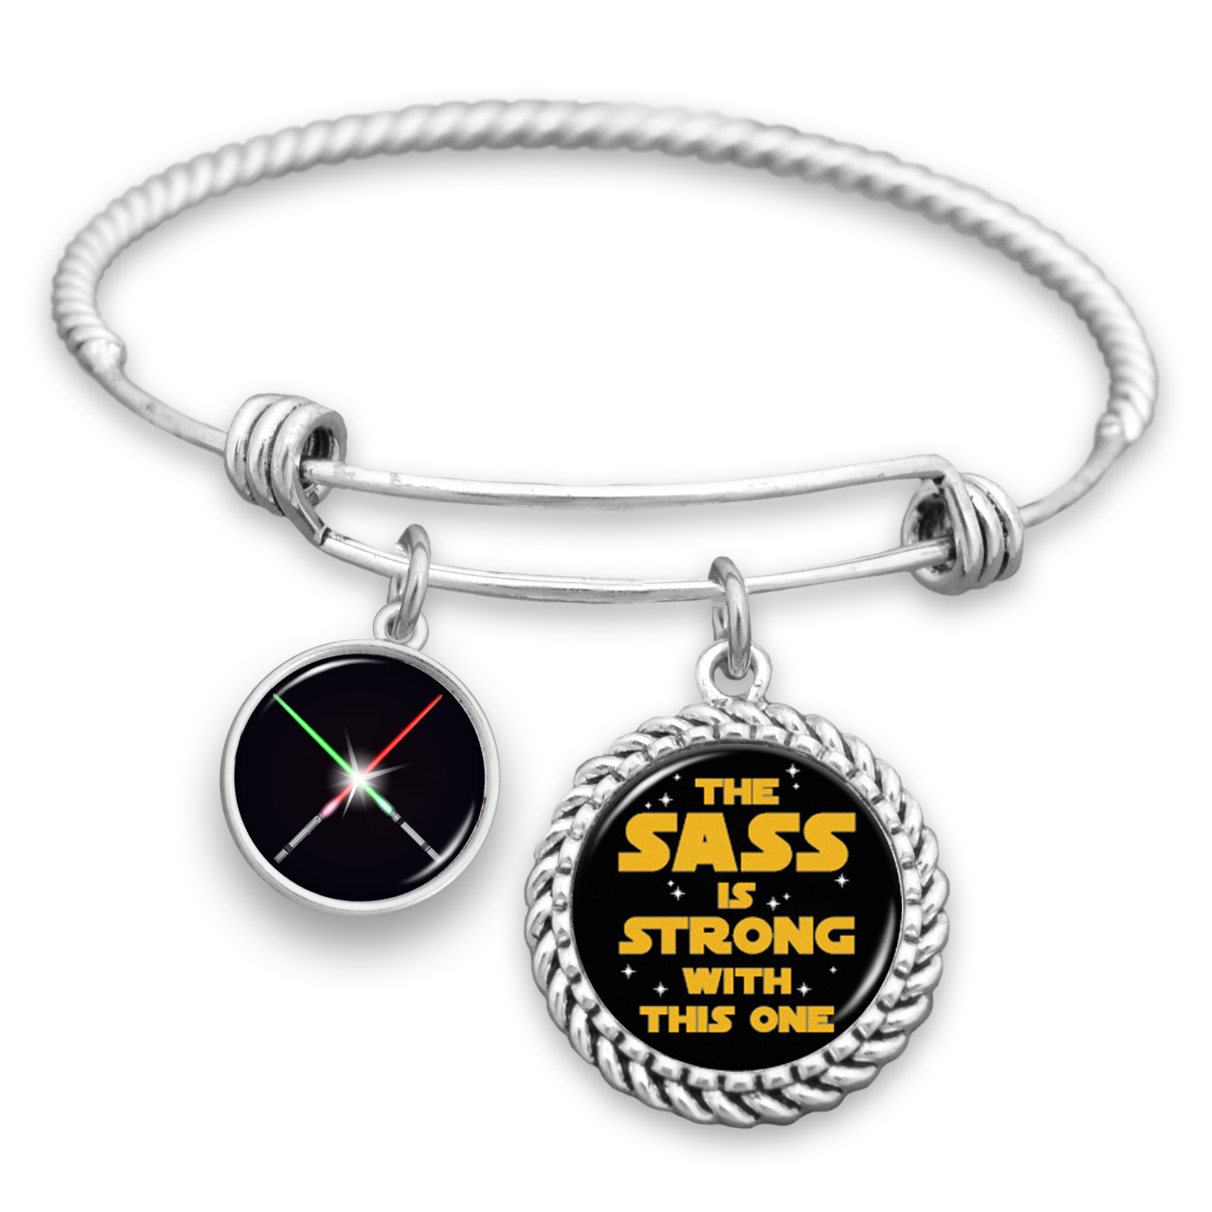 The Sass Is Strong With This One Charm Bracelet